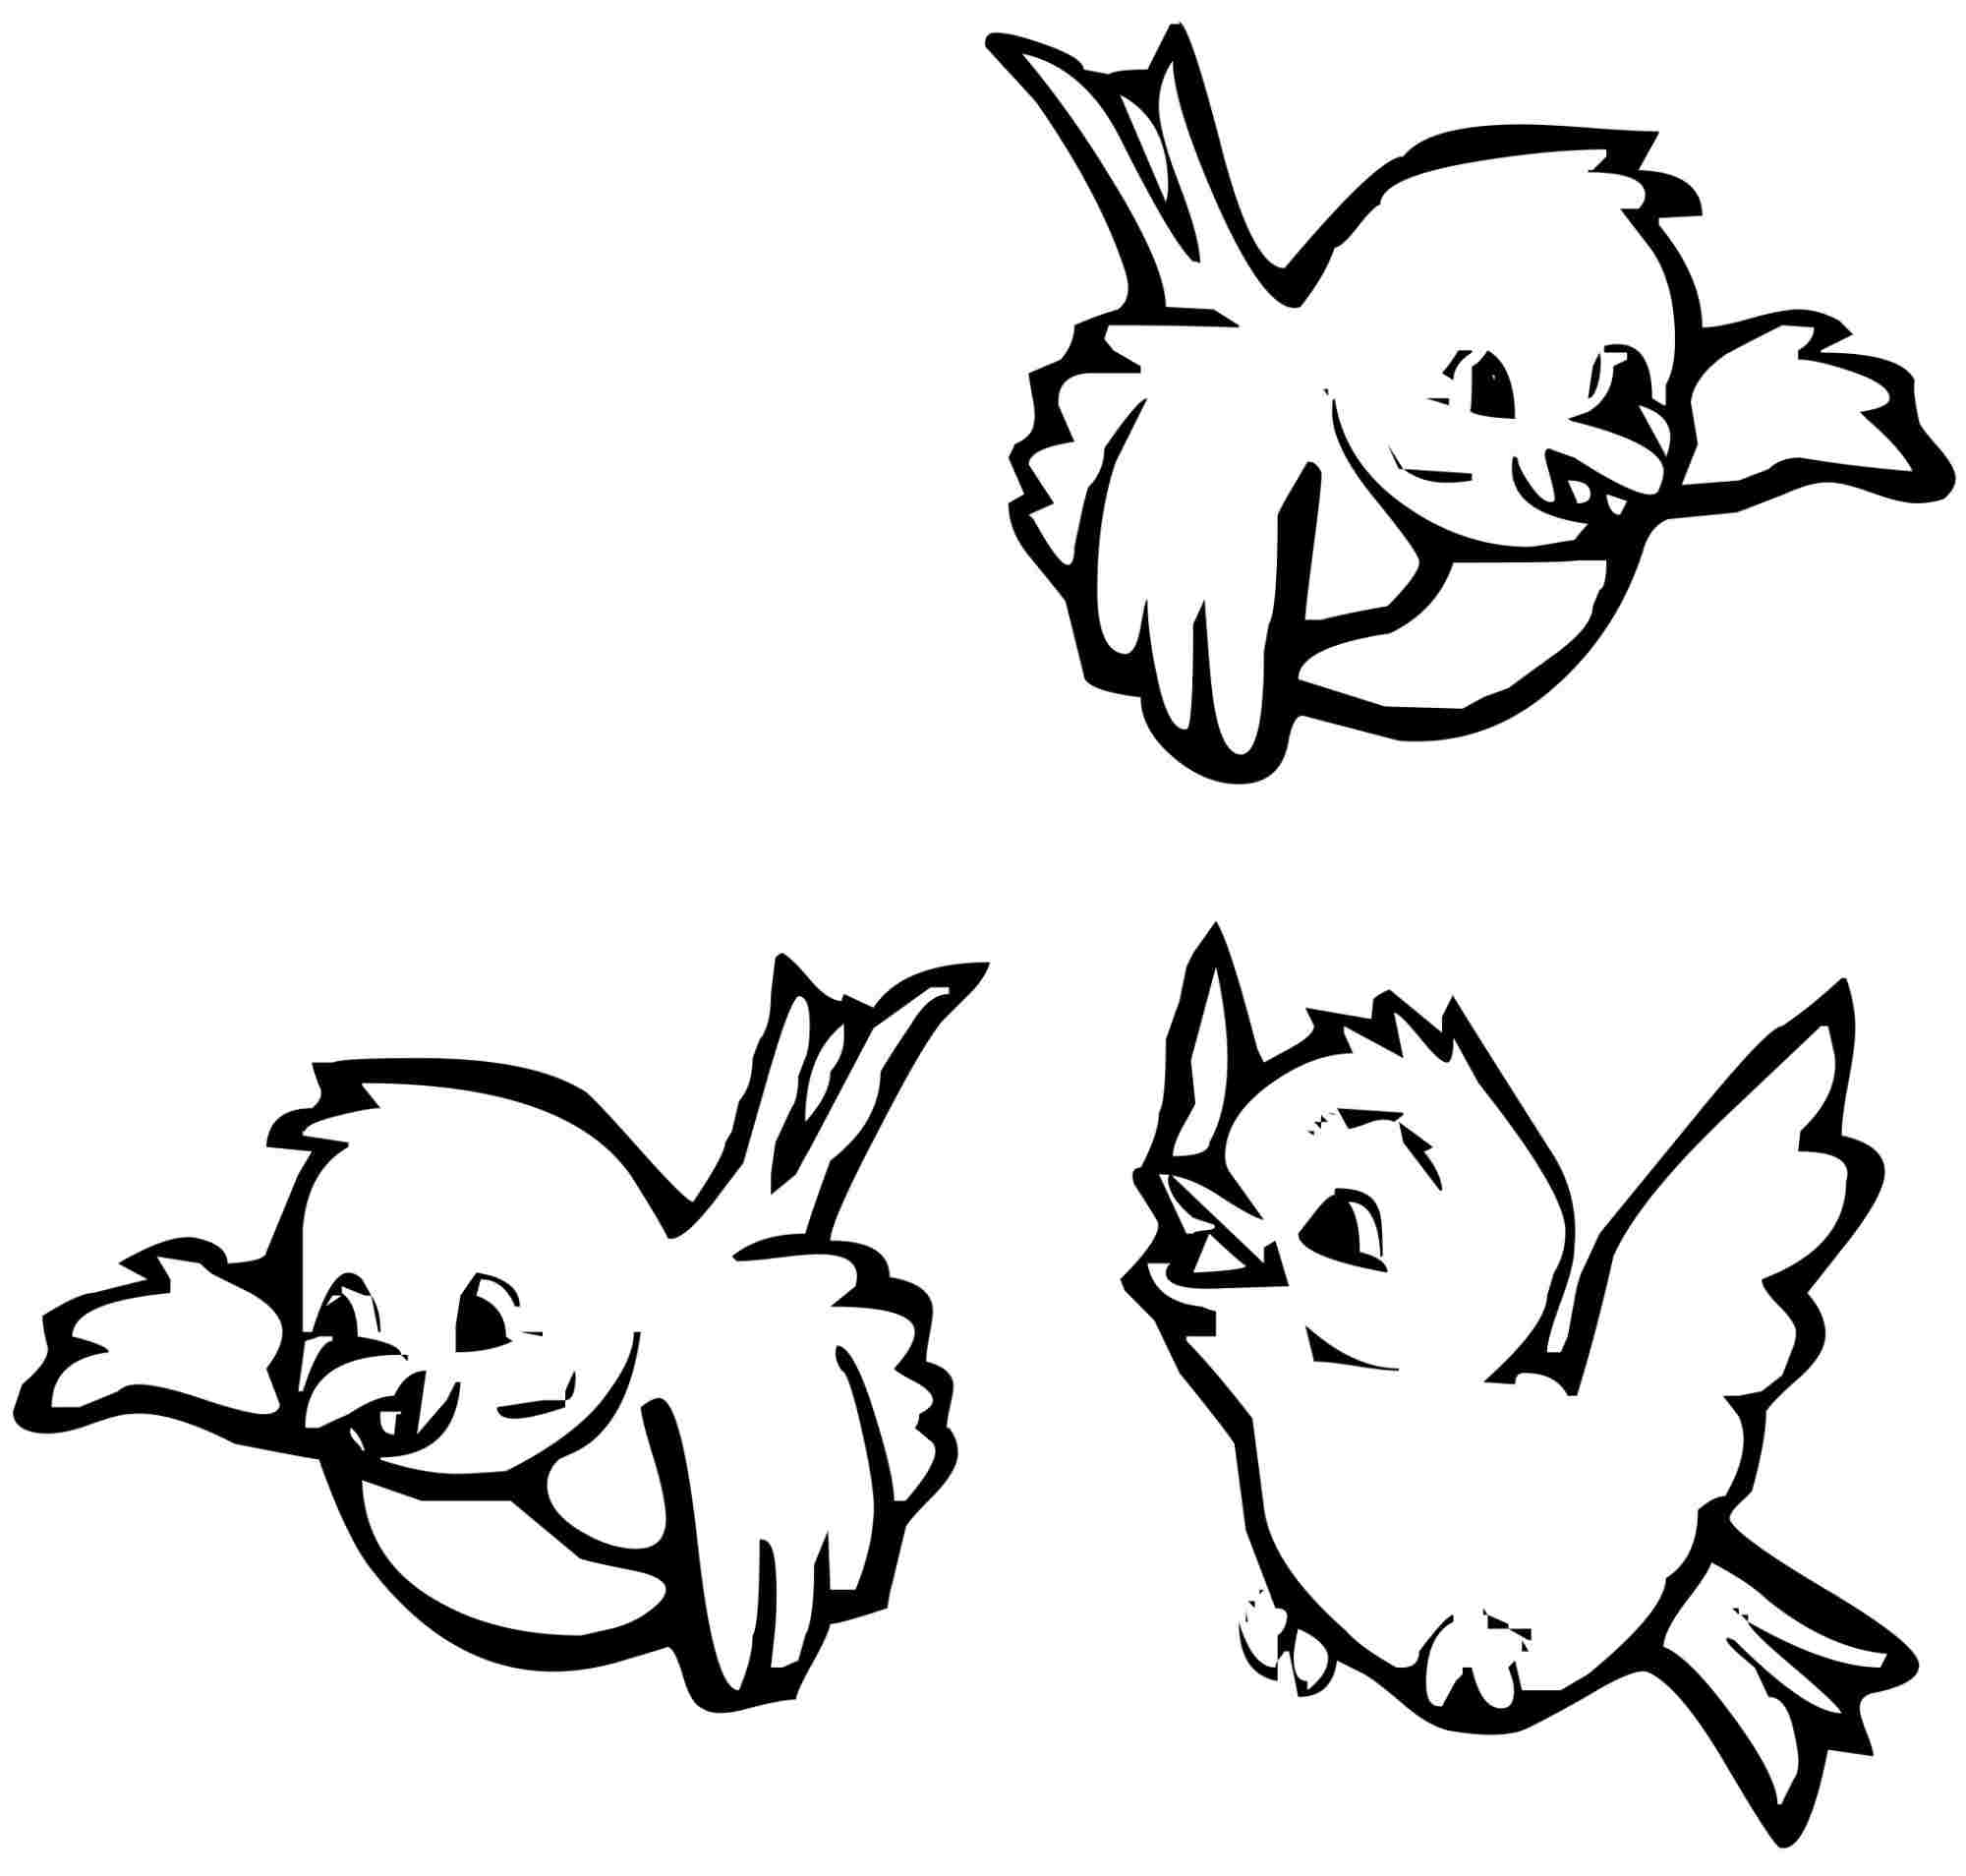 5 Best Images of Printable Bird Coloring Pages - Free ...